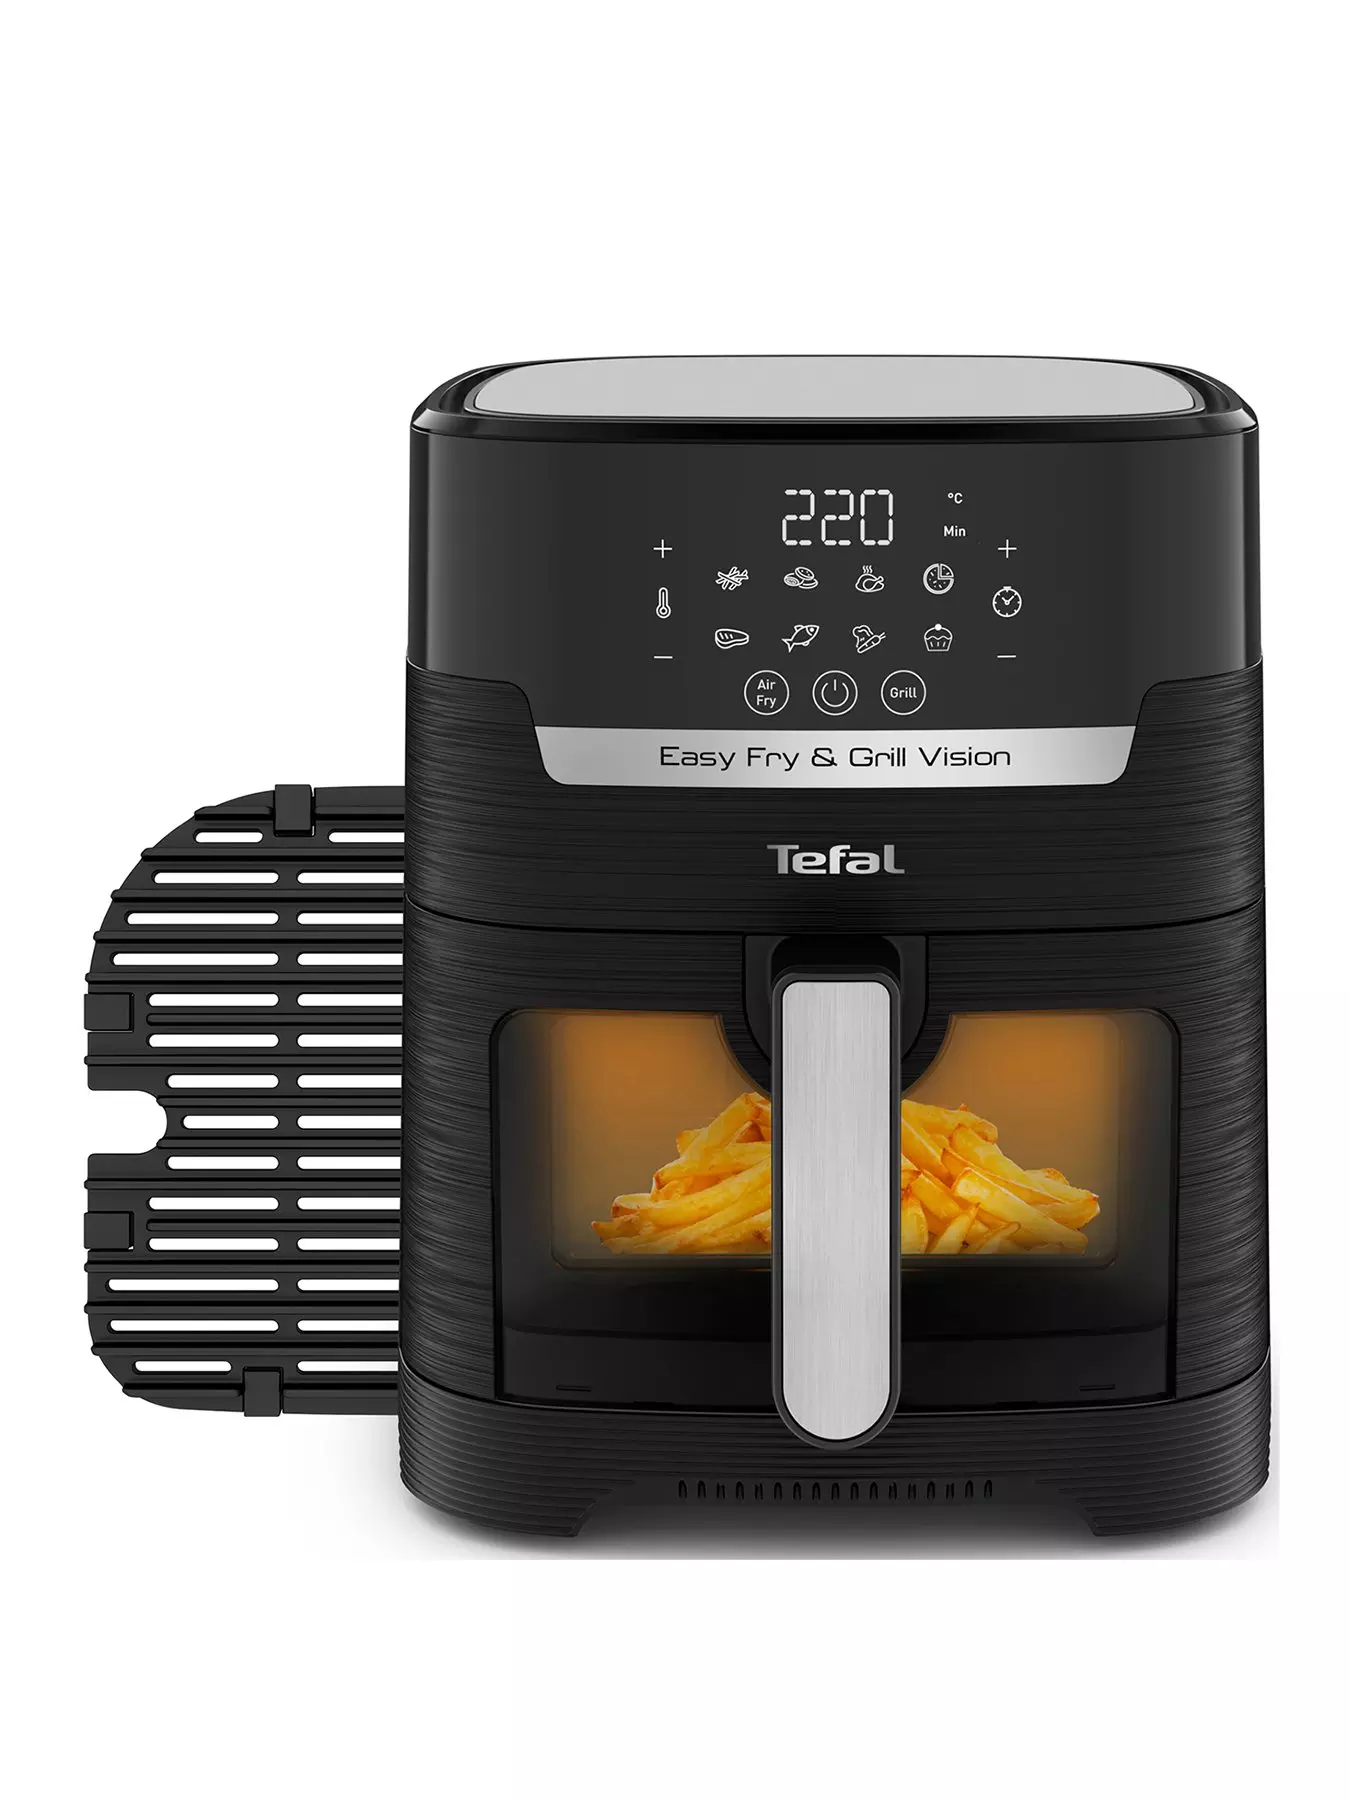 A Busy Girls Life Saver: The Tefal Airfryer - WOMAN